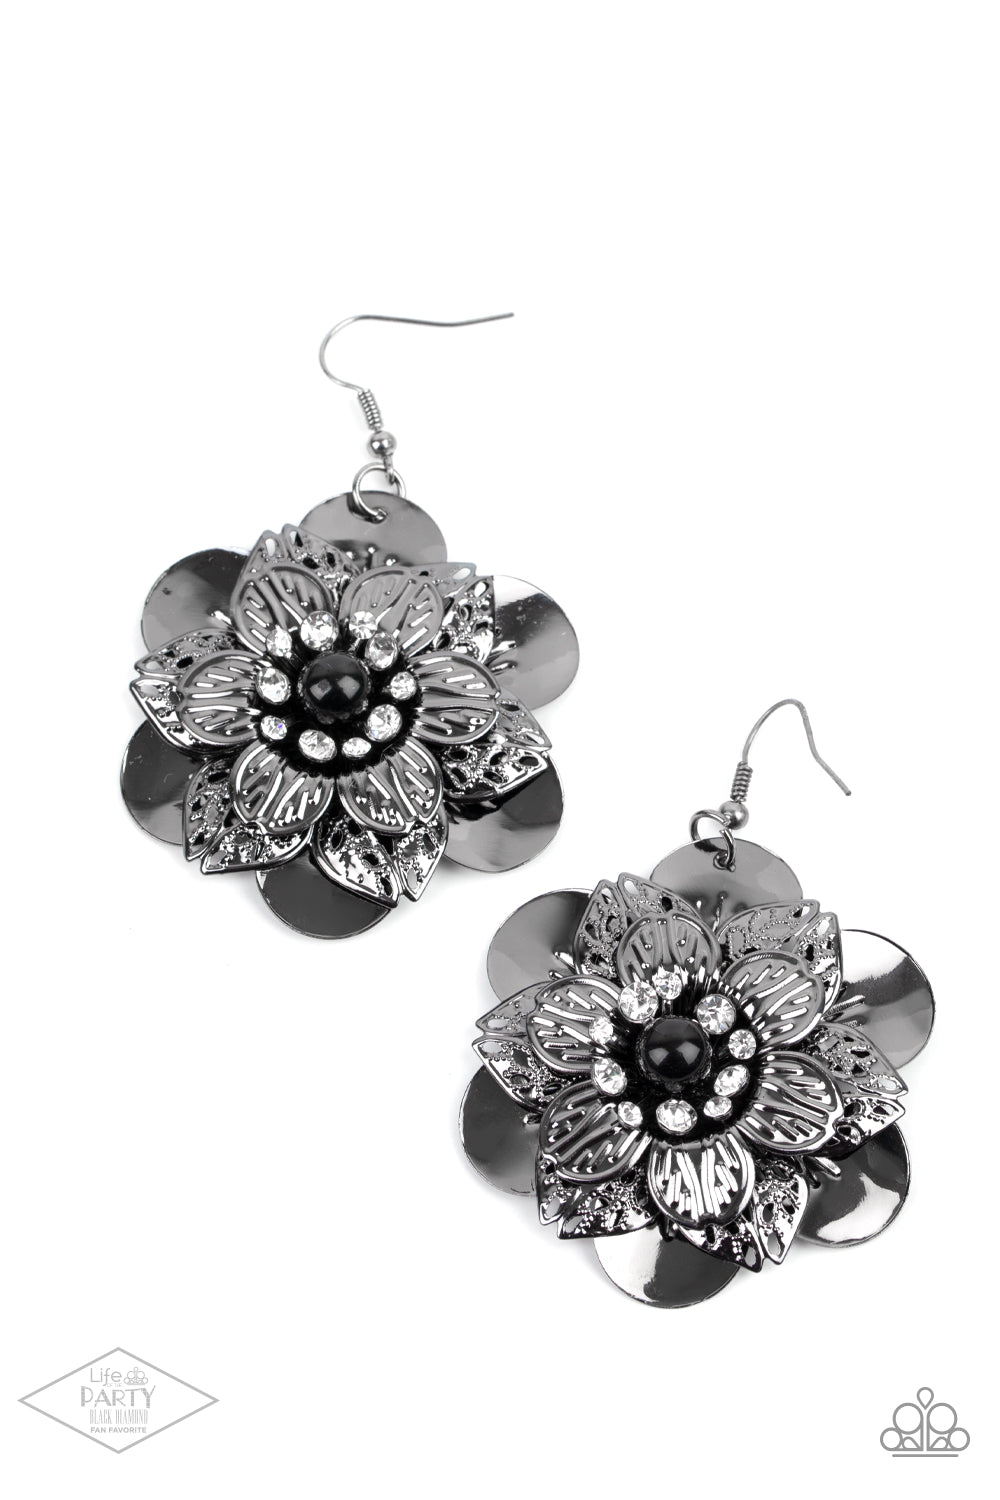 Sleek gunmetal petals with a variety of textures are layered to create a dramatic flower. A single black bead bordered by a ring of rhinestones anchors the design while adding unmatched sparkle. Earring attaches to a standard fishhook fitting.